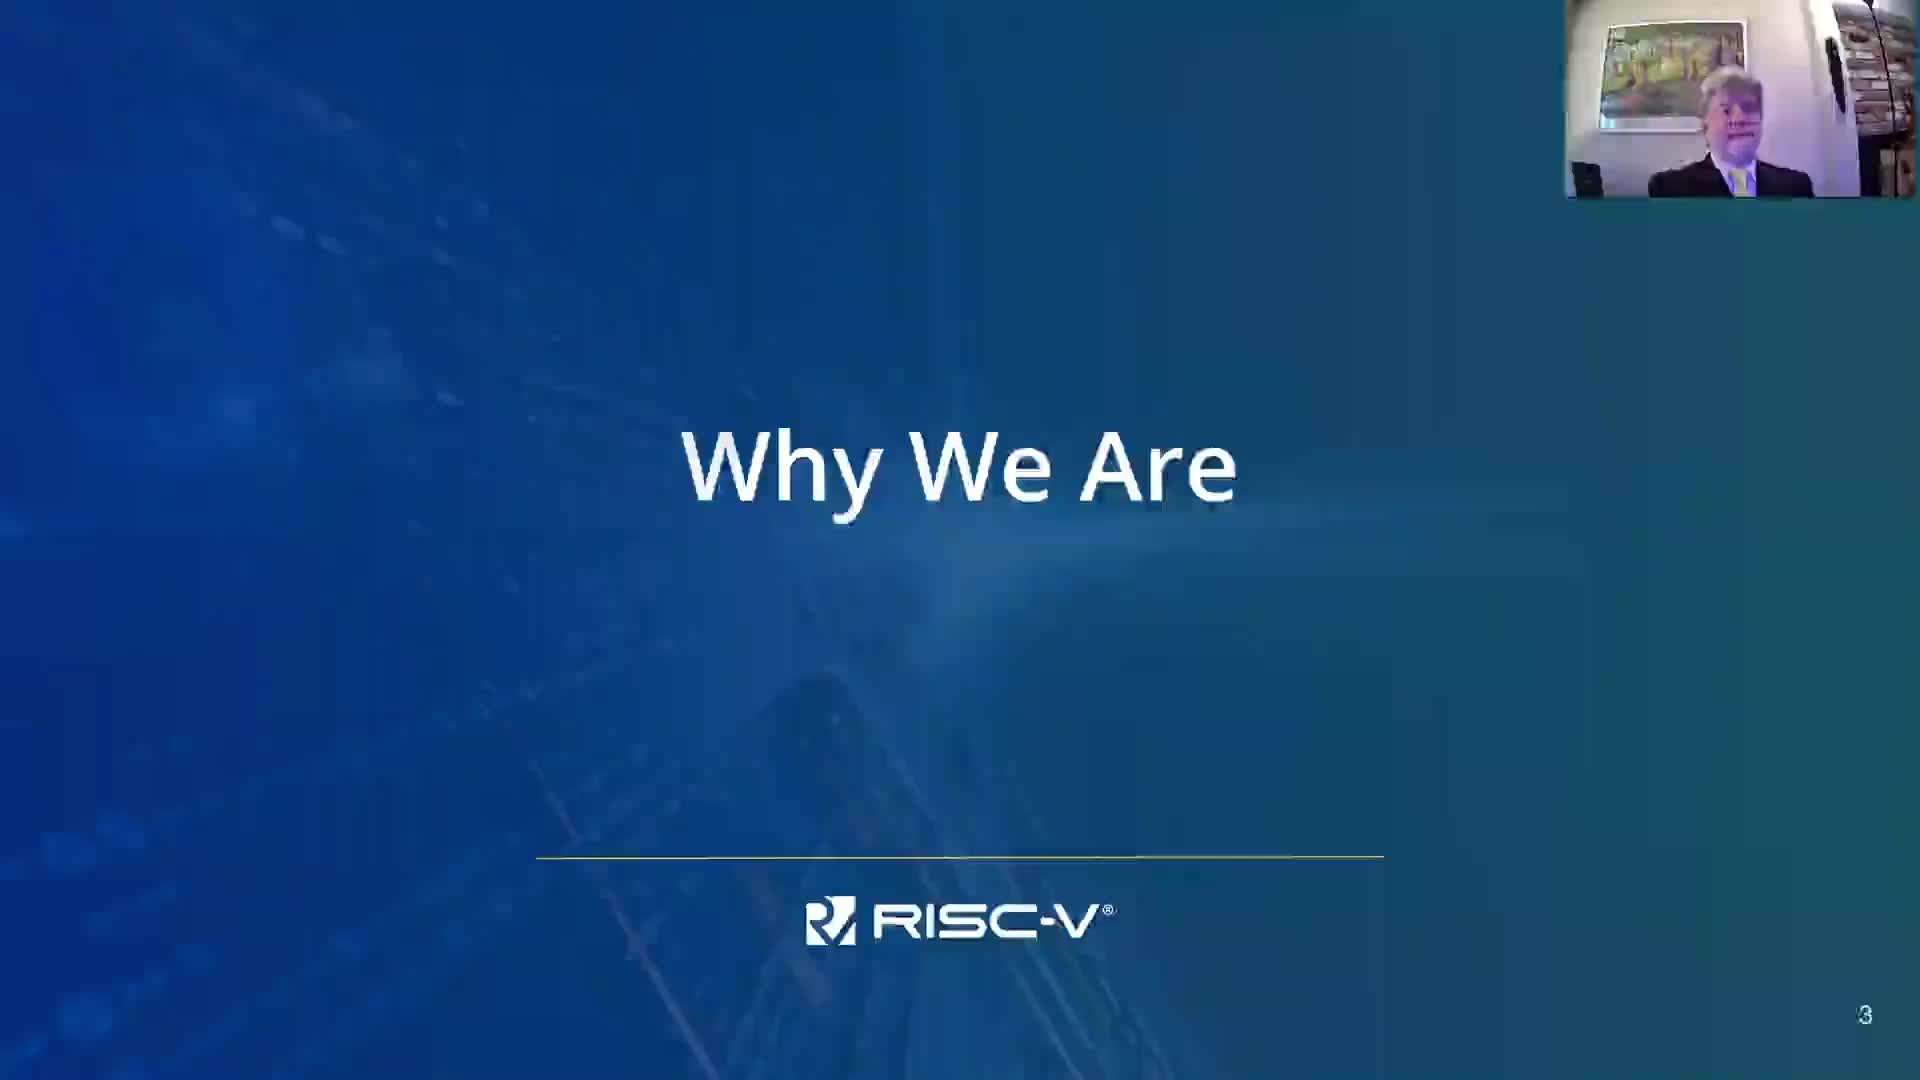 Mark Himelstein - RISC-V - The Road Ahead - 第一届 RISC-V1